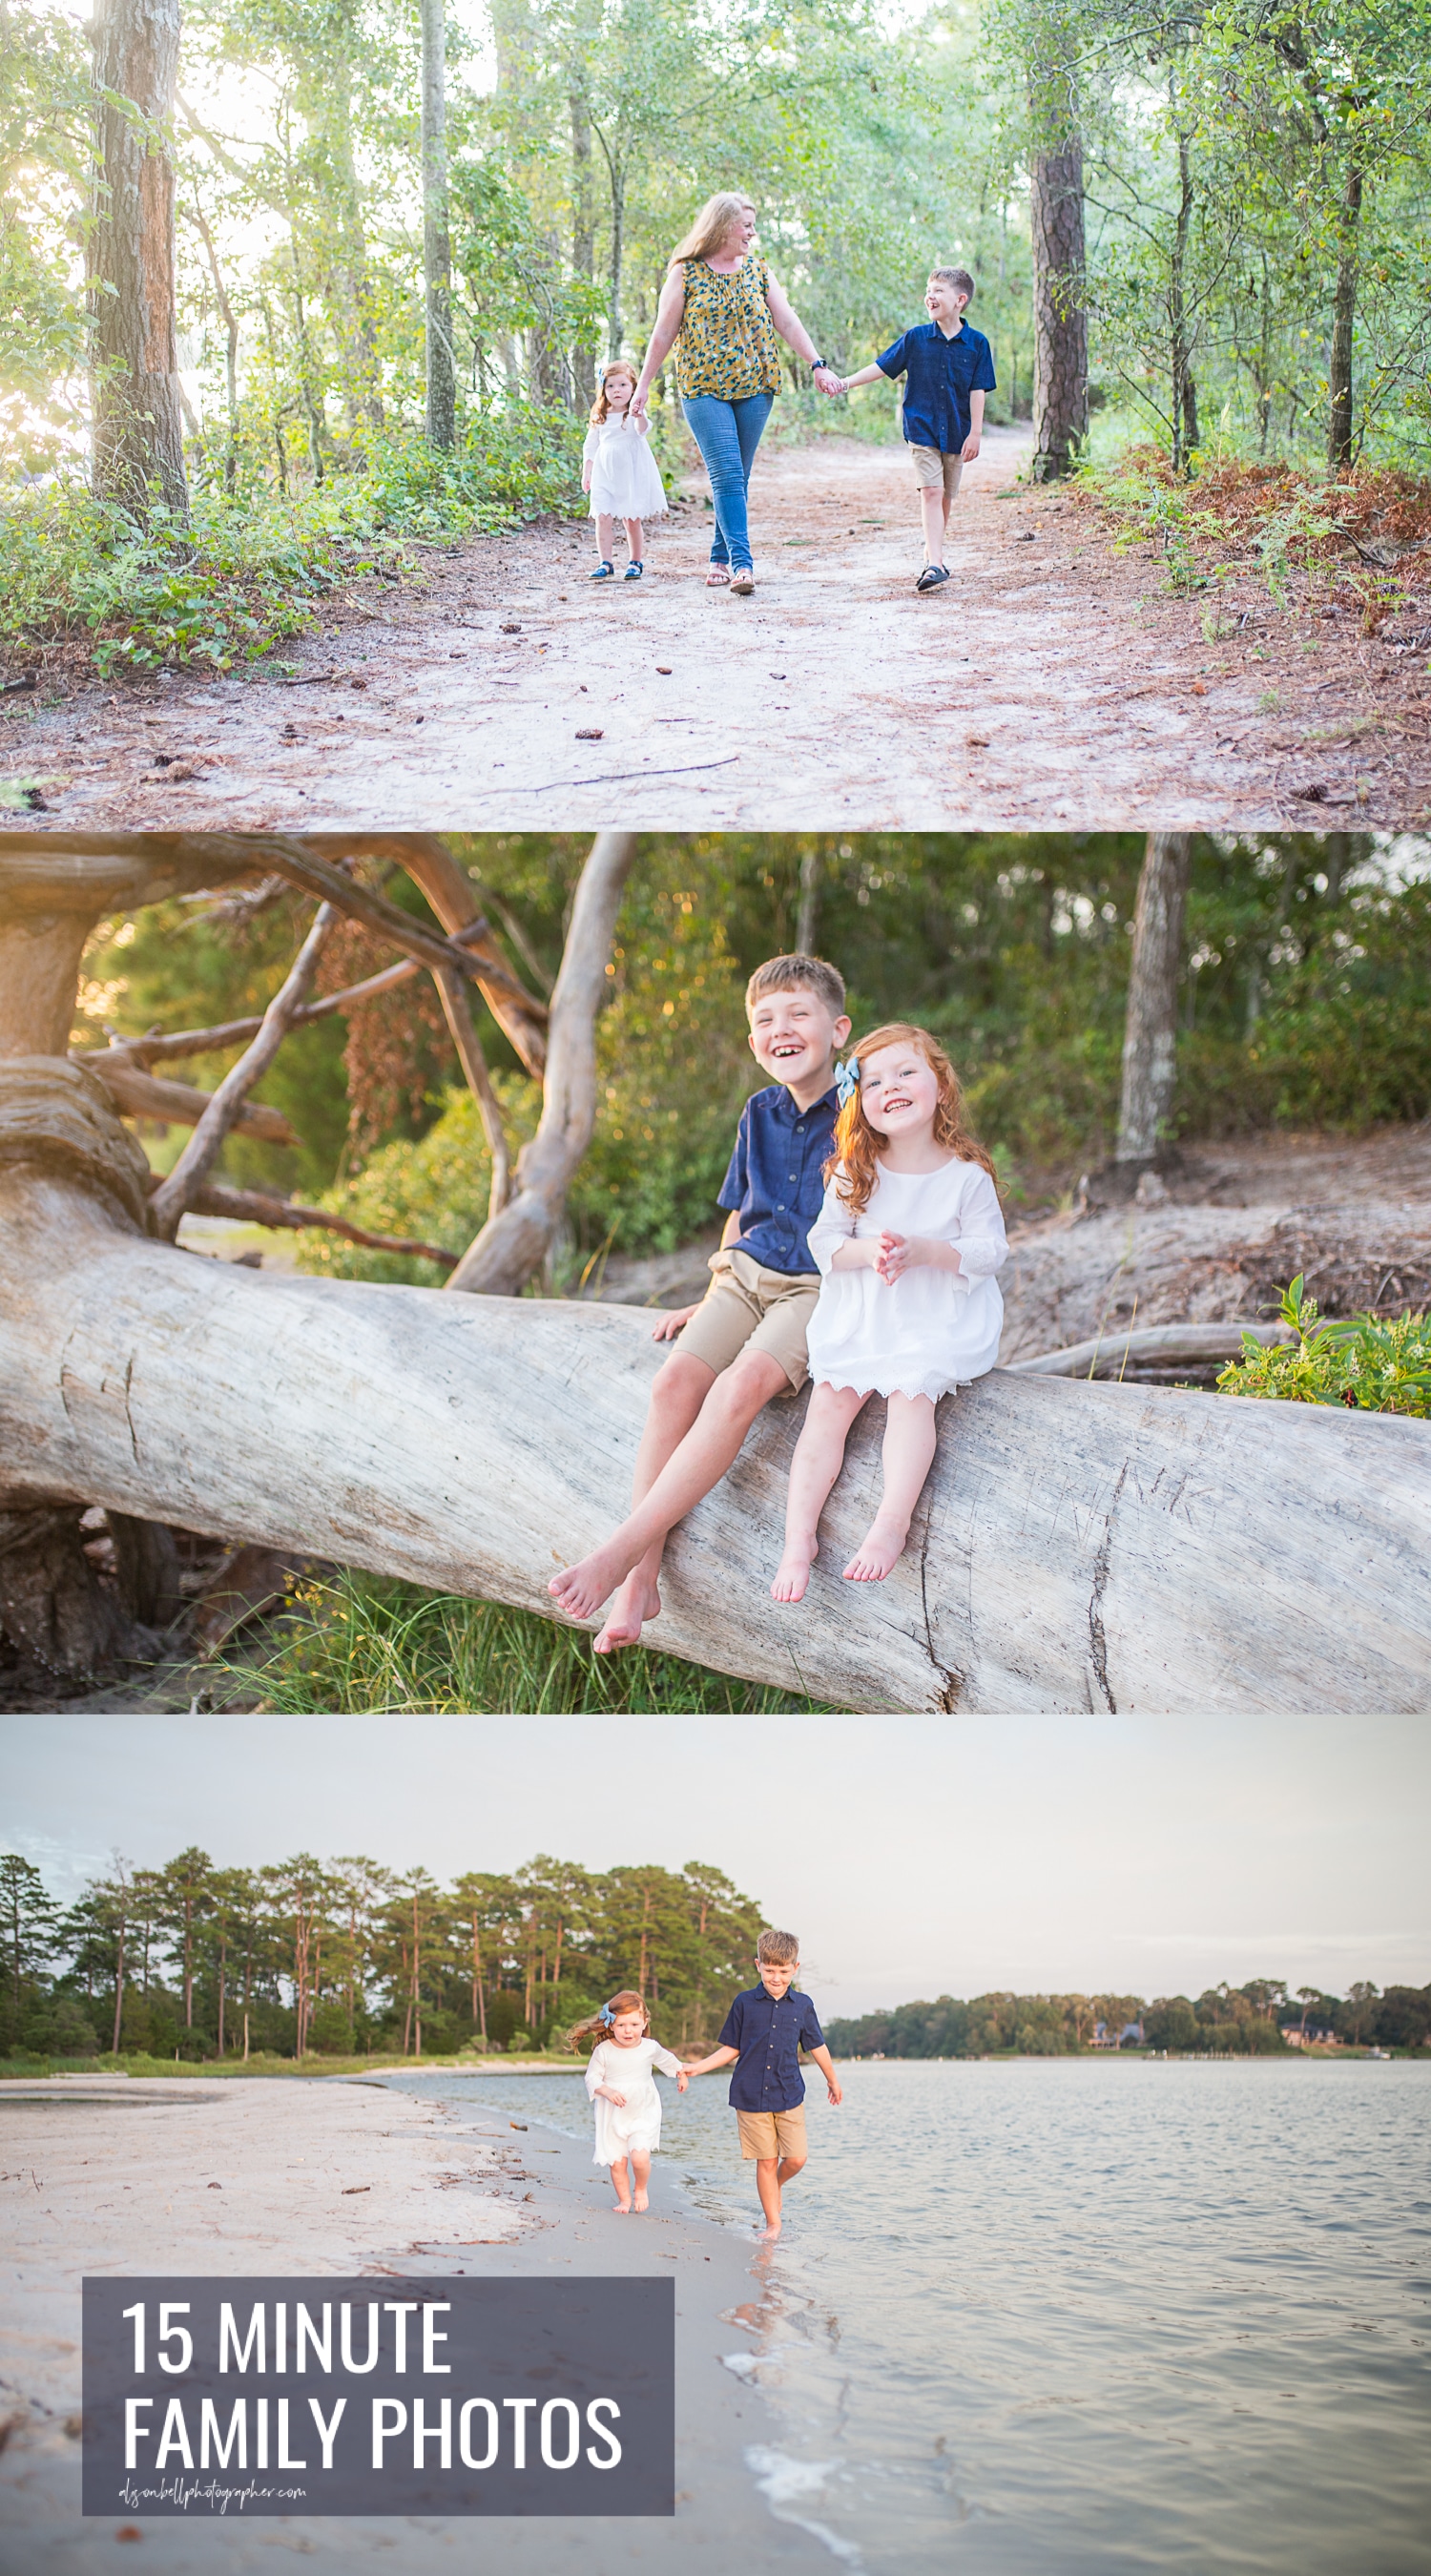 Family mini sessions at first landing state park The Narrows by Alison bell, Photographer alisonbellphotographer.com